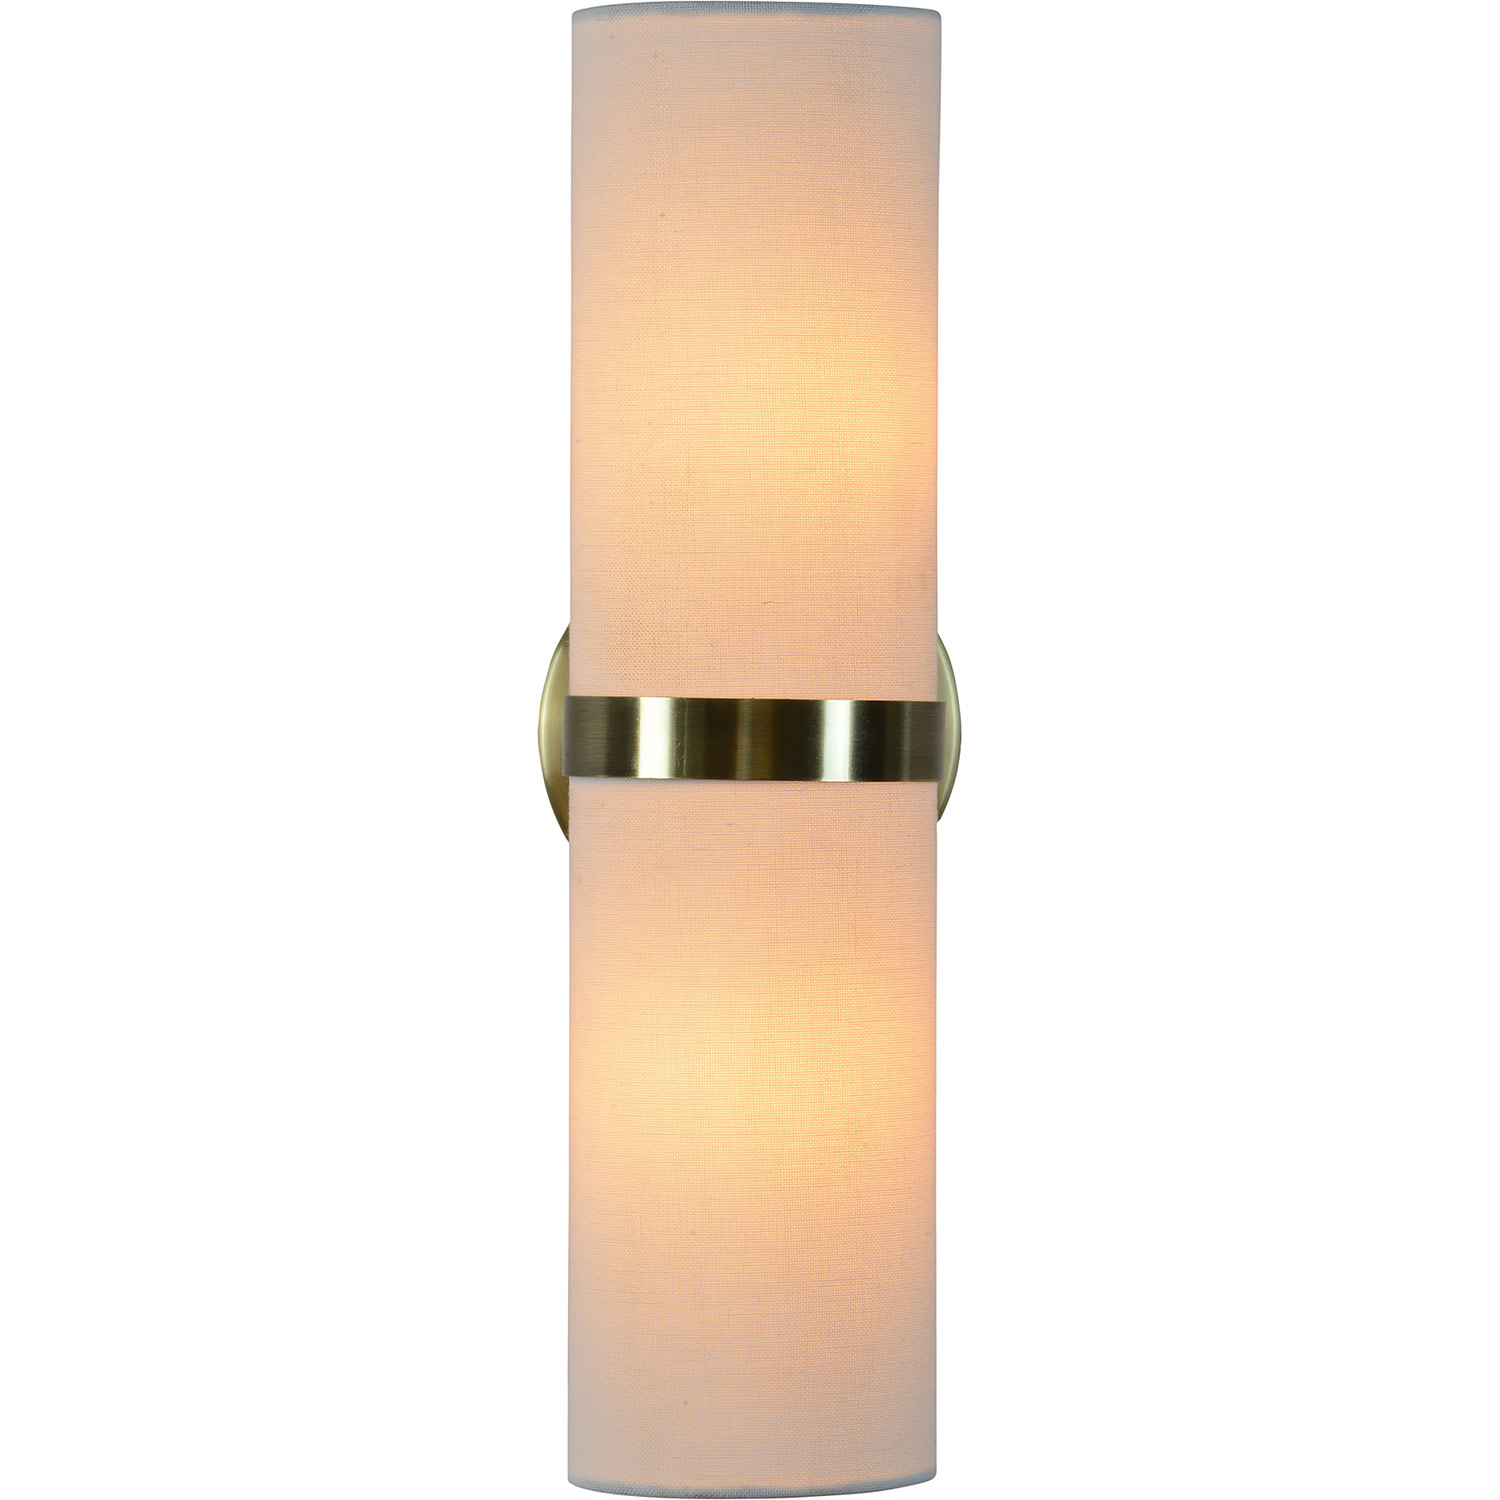 Ren-Wil Holtham Wall Sconce - Antique Brass